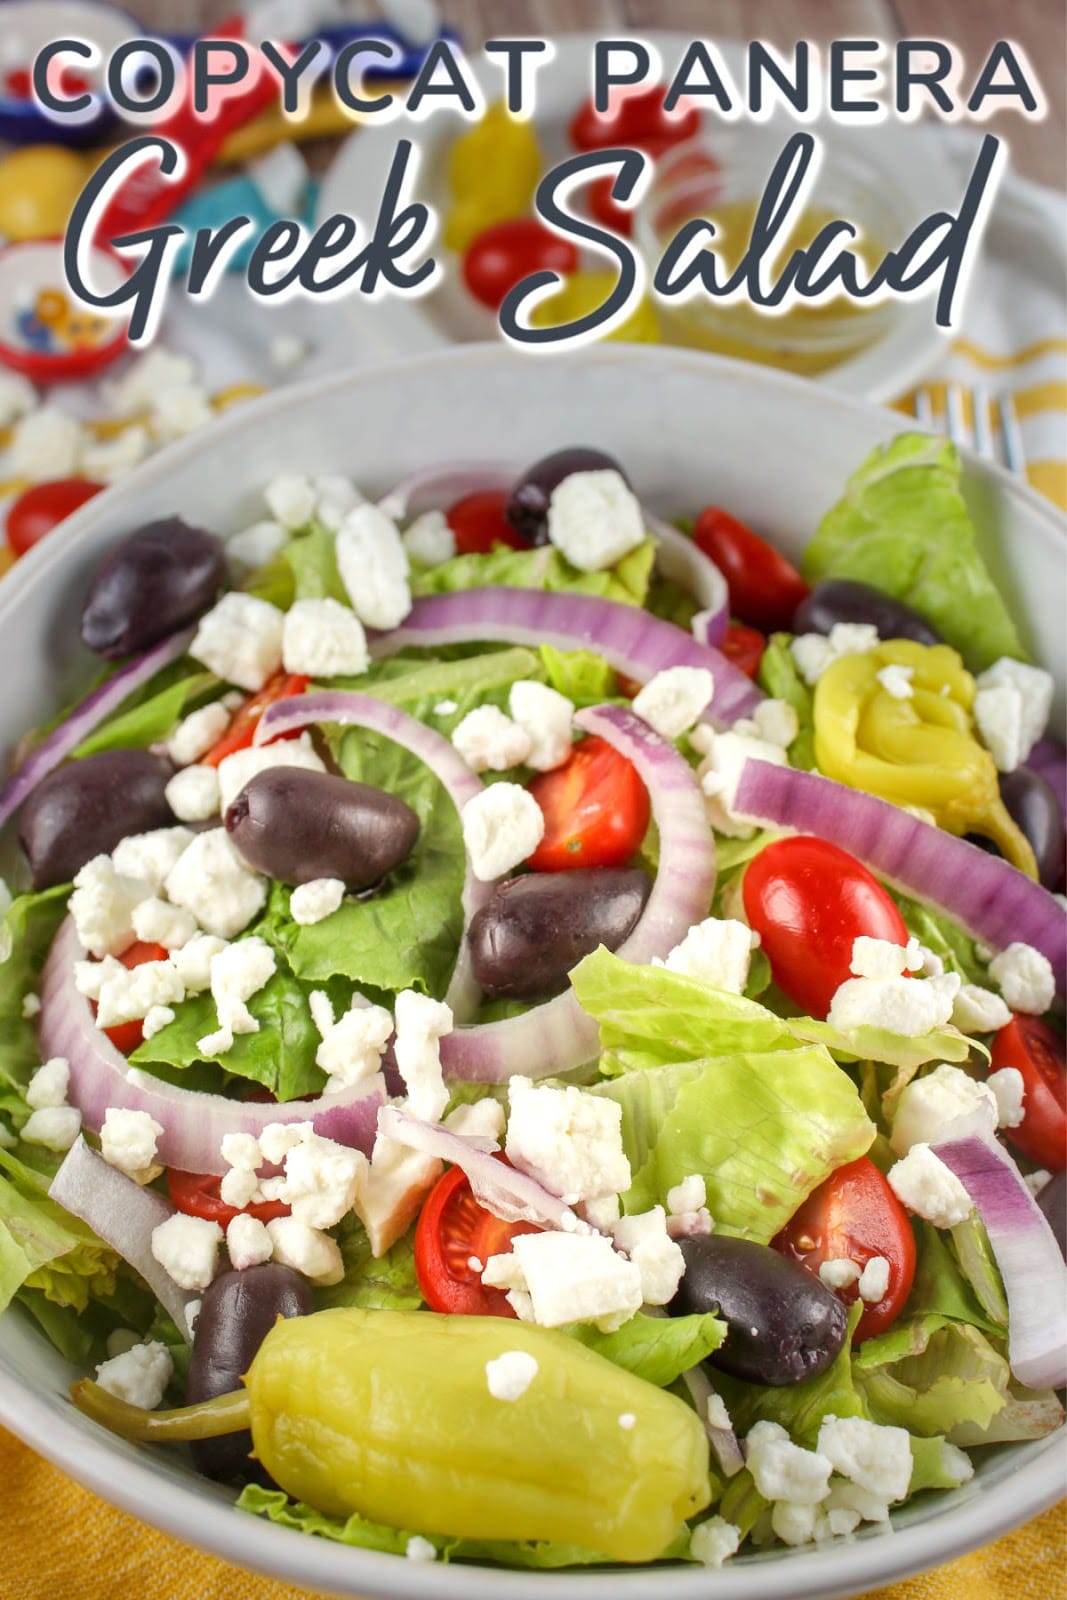 Panera might be known for bread but I love their salads!!!! The Panera Greek Salad is a classic and so delicious – their Greek dressing is also super simple to make!
 via @foodhussy